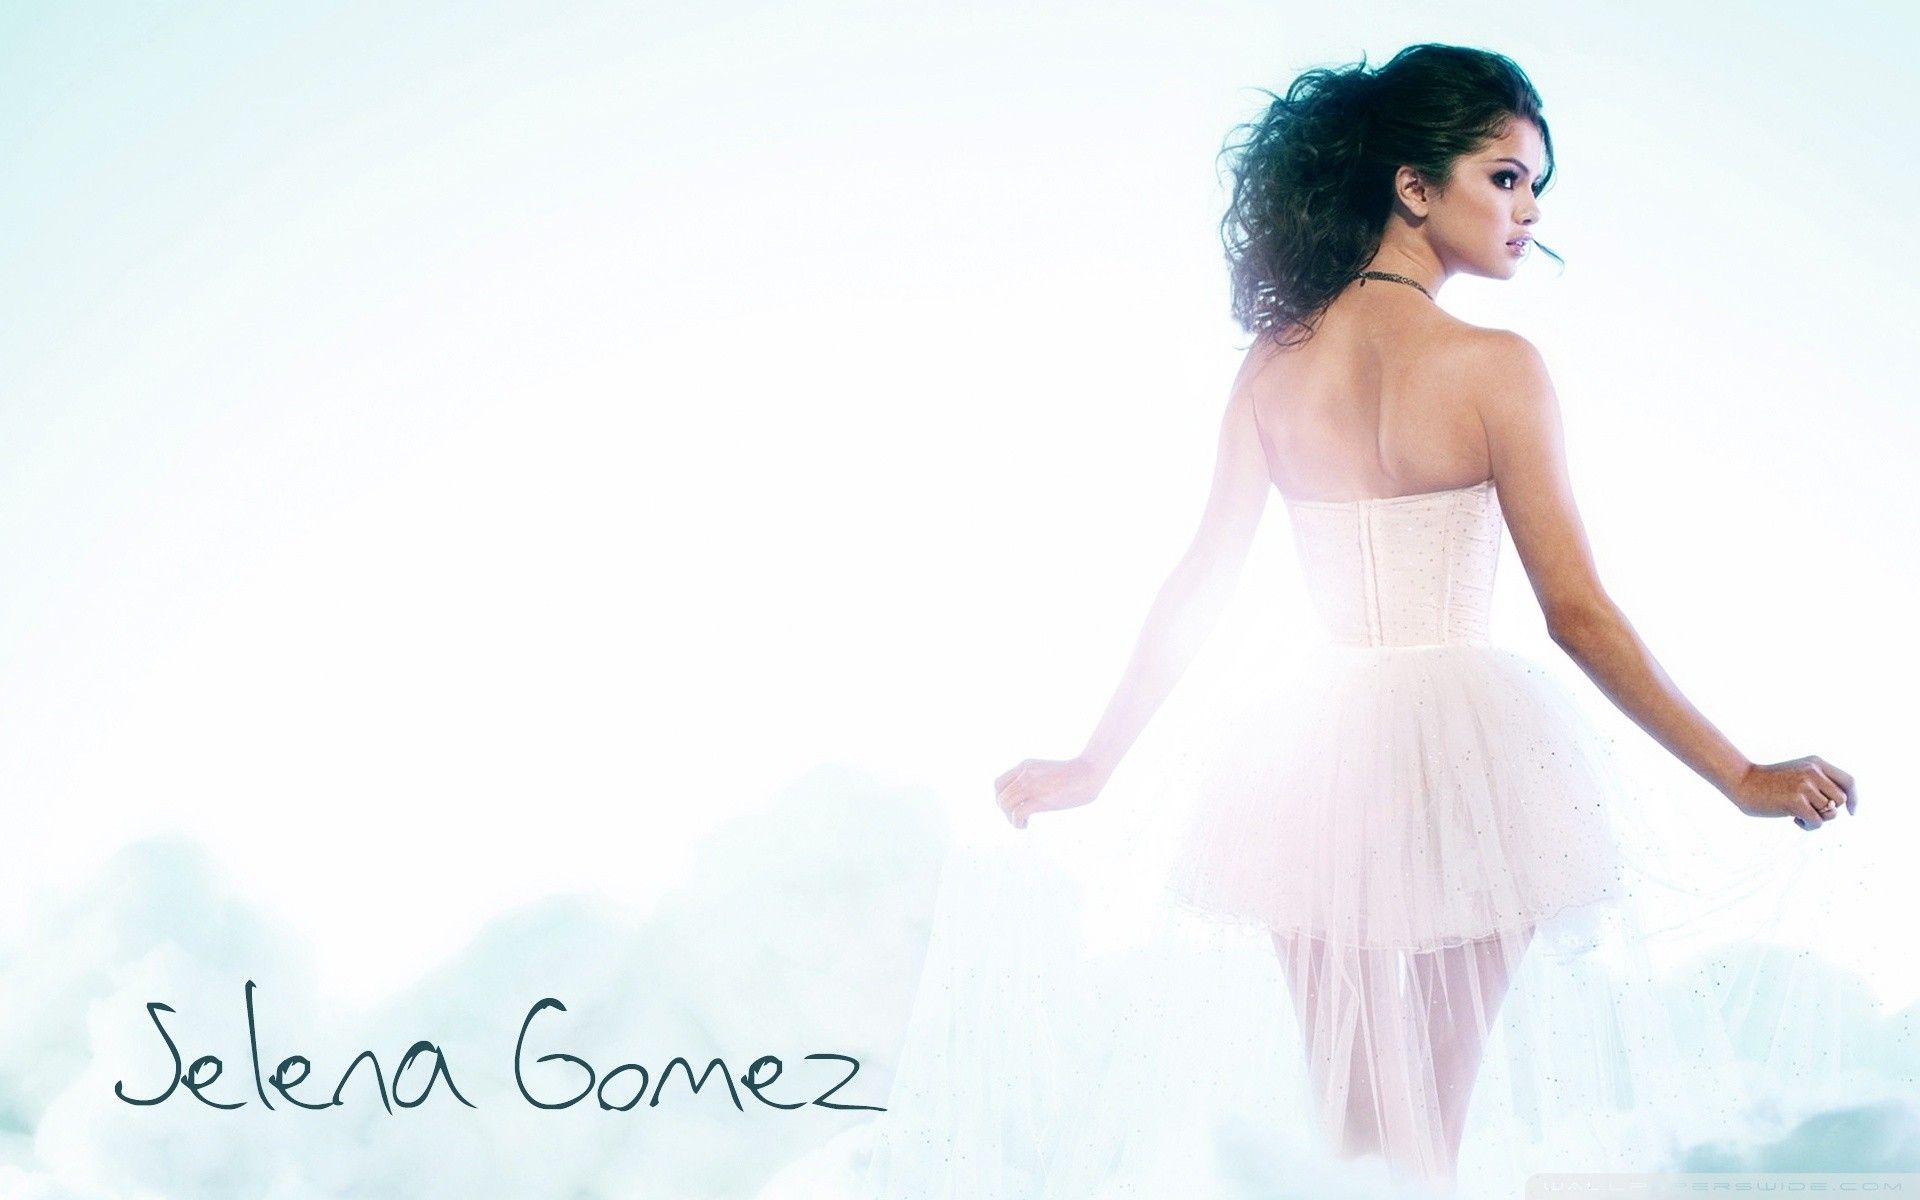 Selena Gomez on a white background wallpapers and images